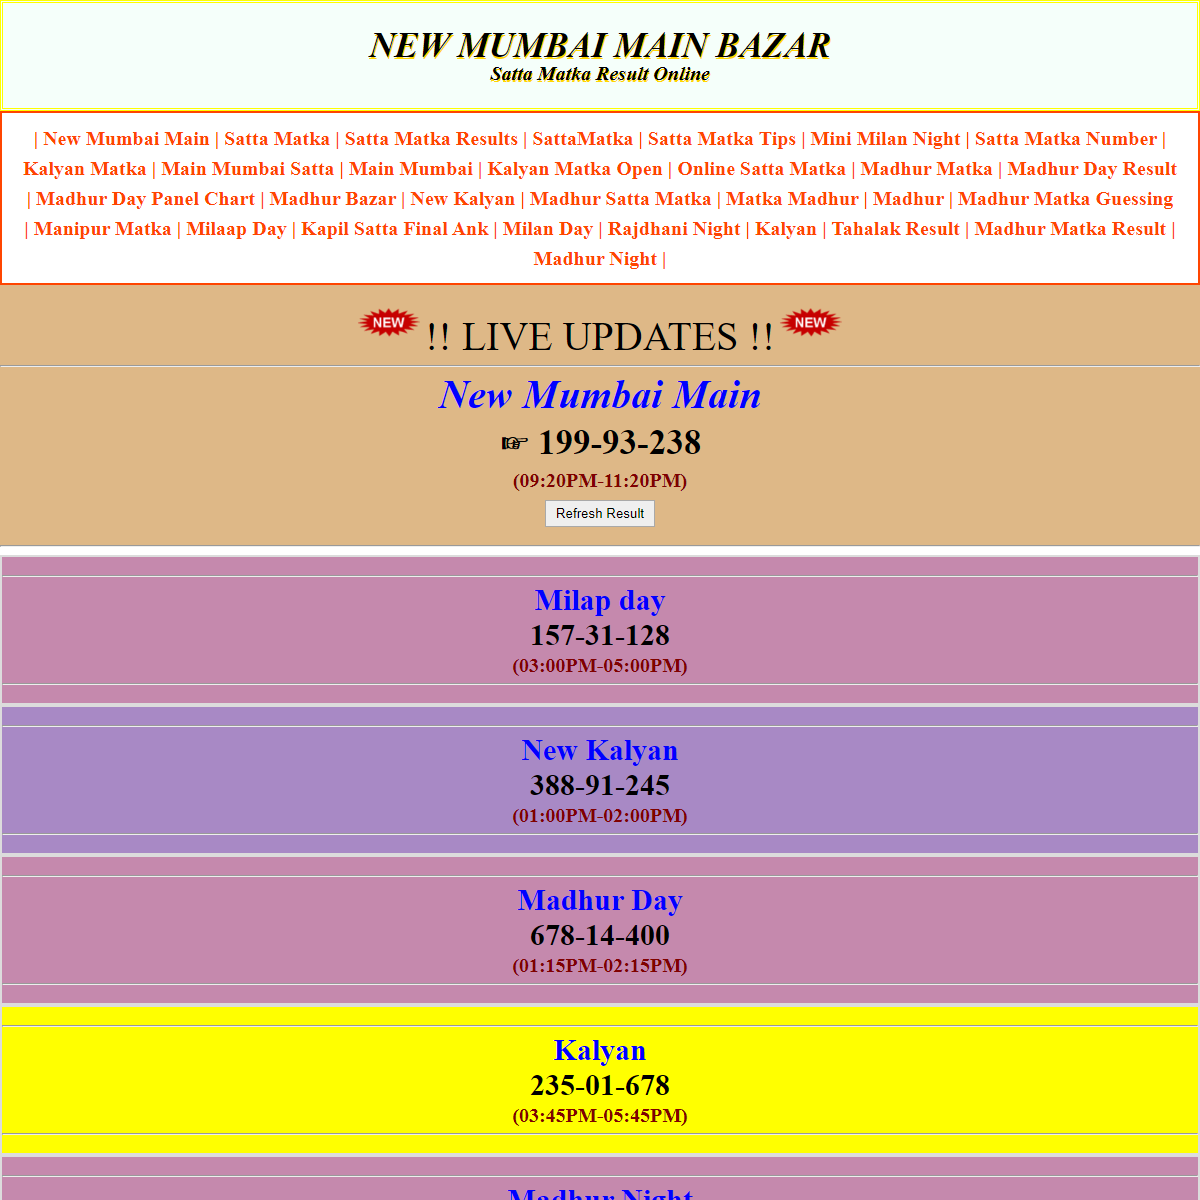 A complete backup of http://newmumbaimainbazar.in/